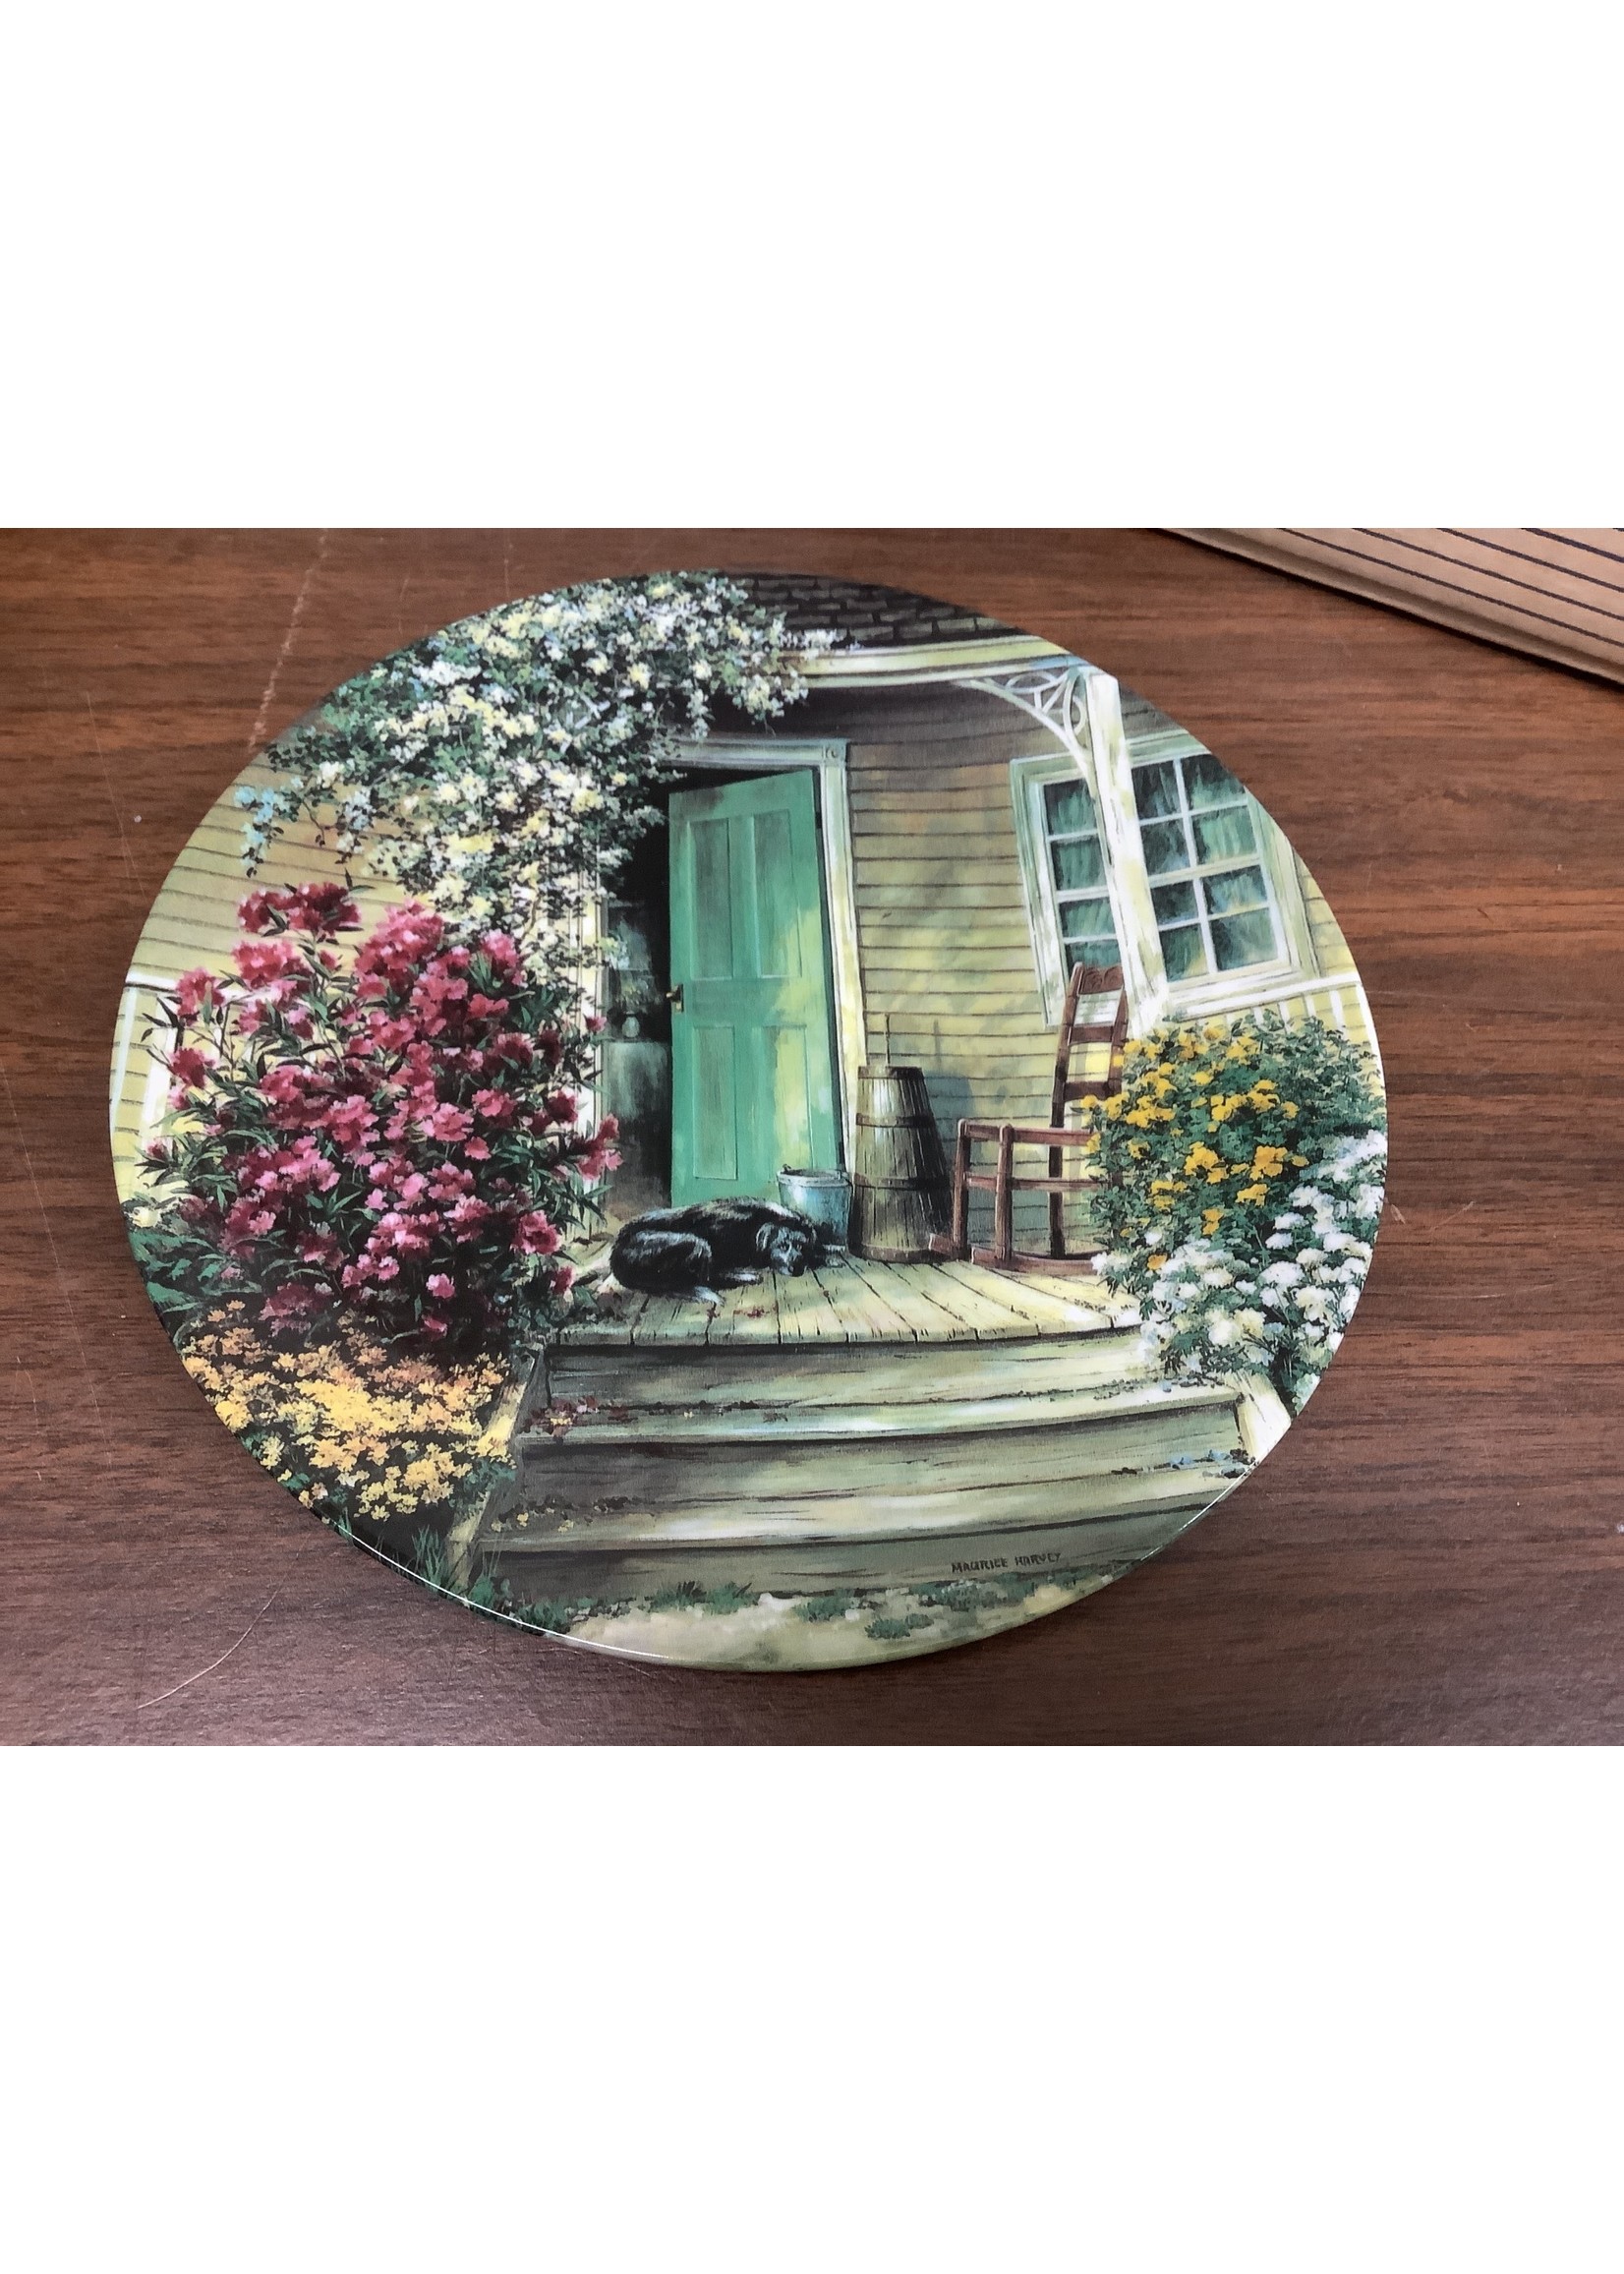 The Bradford Exchange Collectors Plate (1990) “The Wooden Butter Churn” Bradex-Nr. 84-G20-18.5